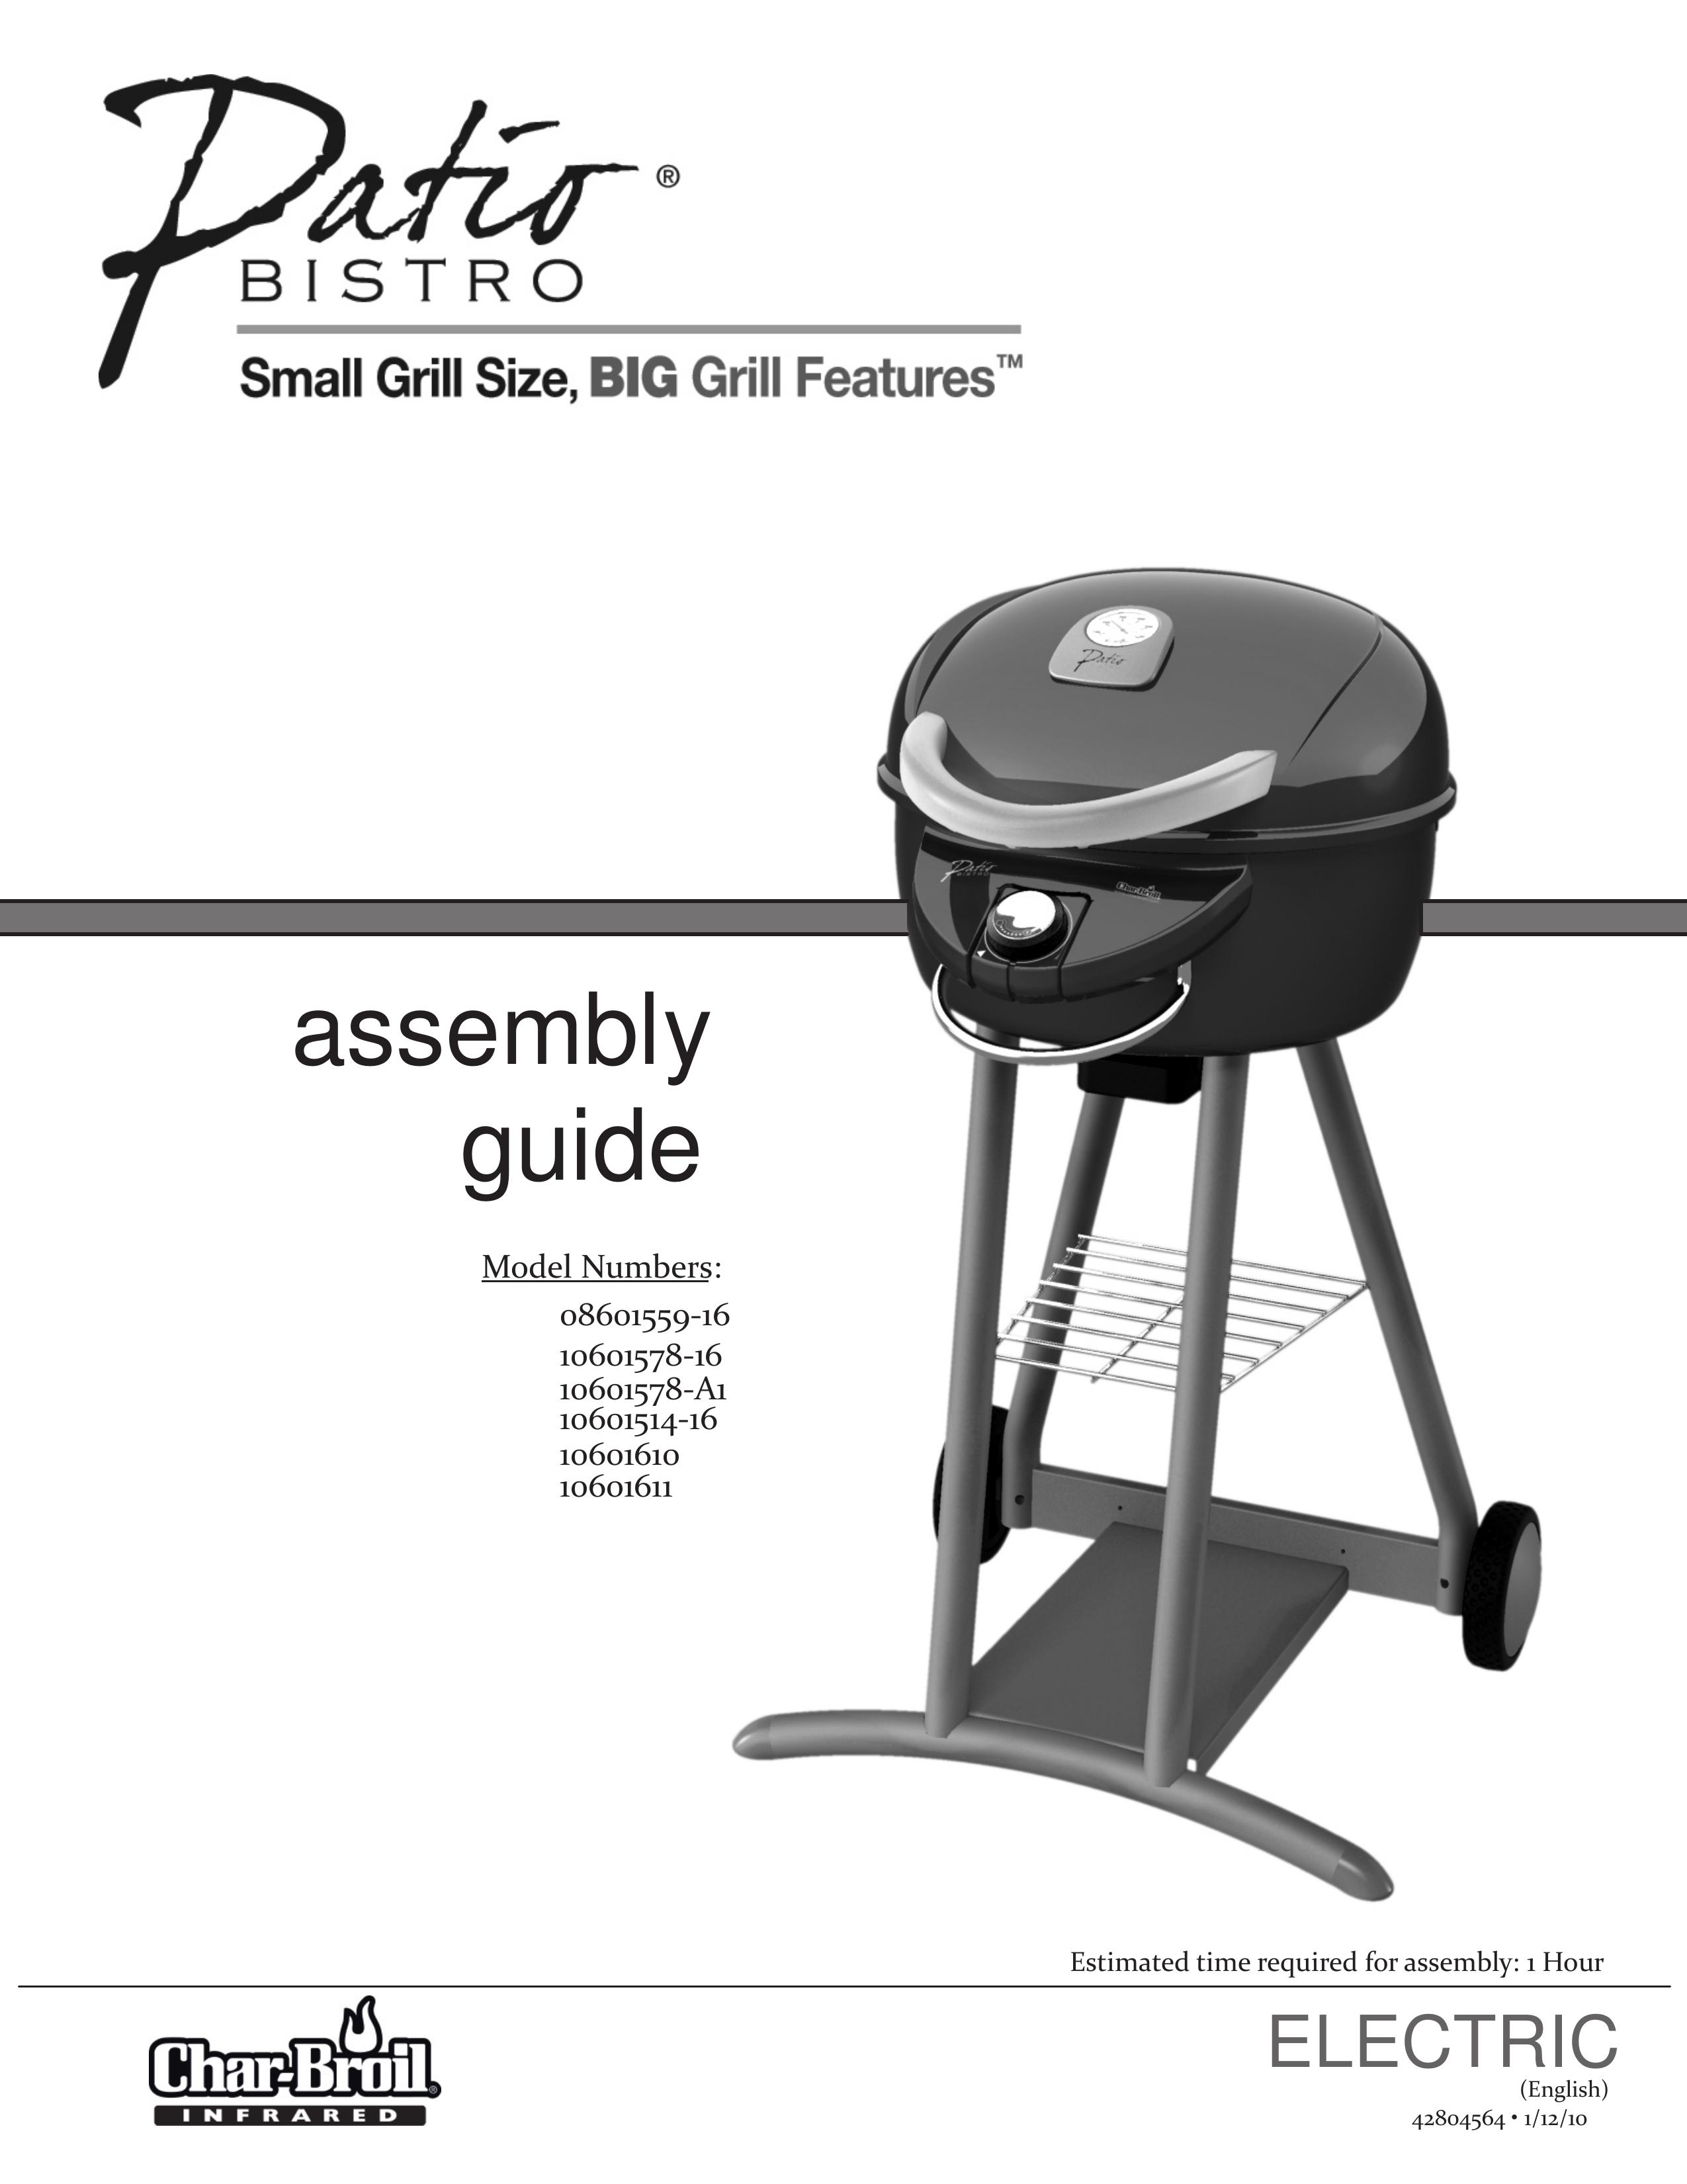 Char-Broil 10601610 Electric Grill User Manual